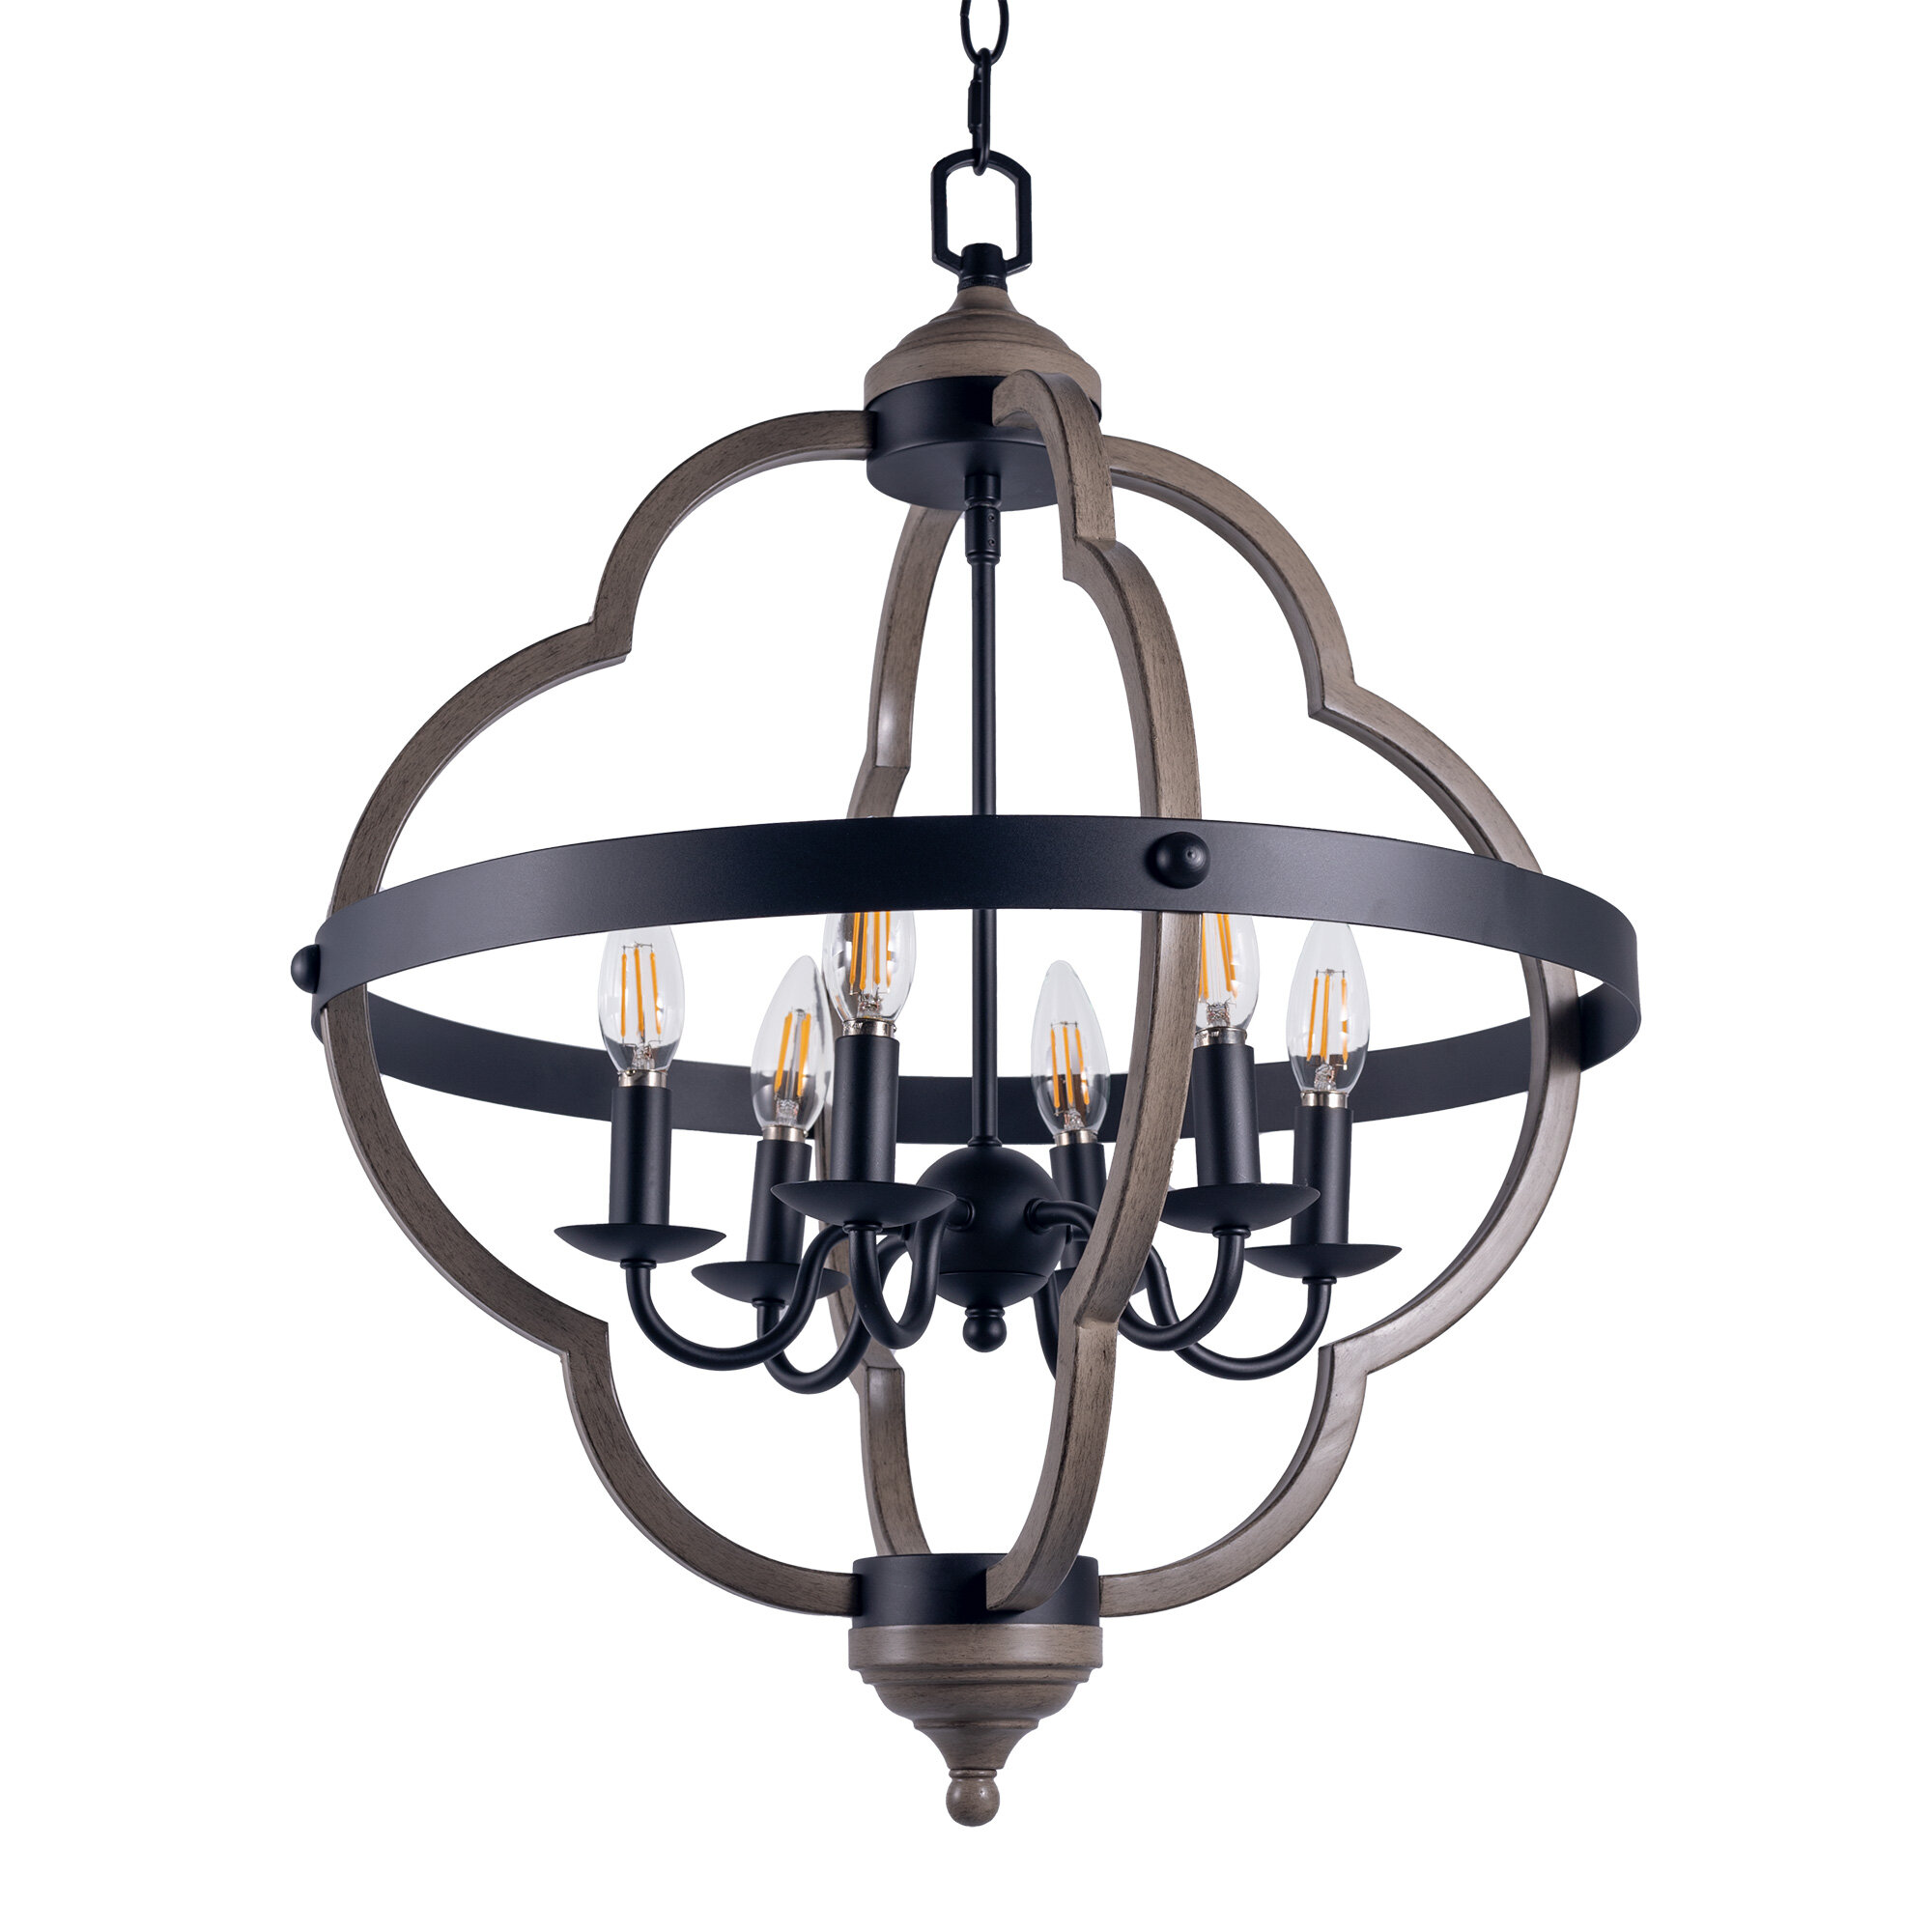 Image of [USA Direct] 6-Light Candle Style Geometric Chandelier Industrial Rustic Indoor Pendant Light Without Bulbs